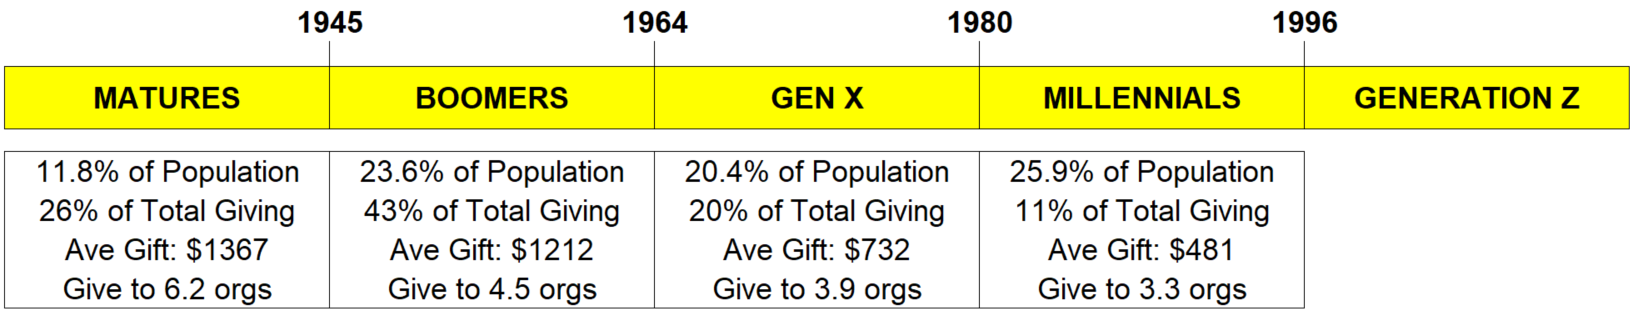 table of figures of various generations habits of giving